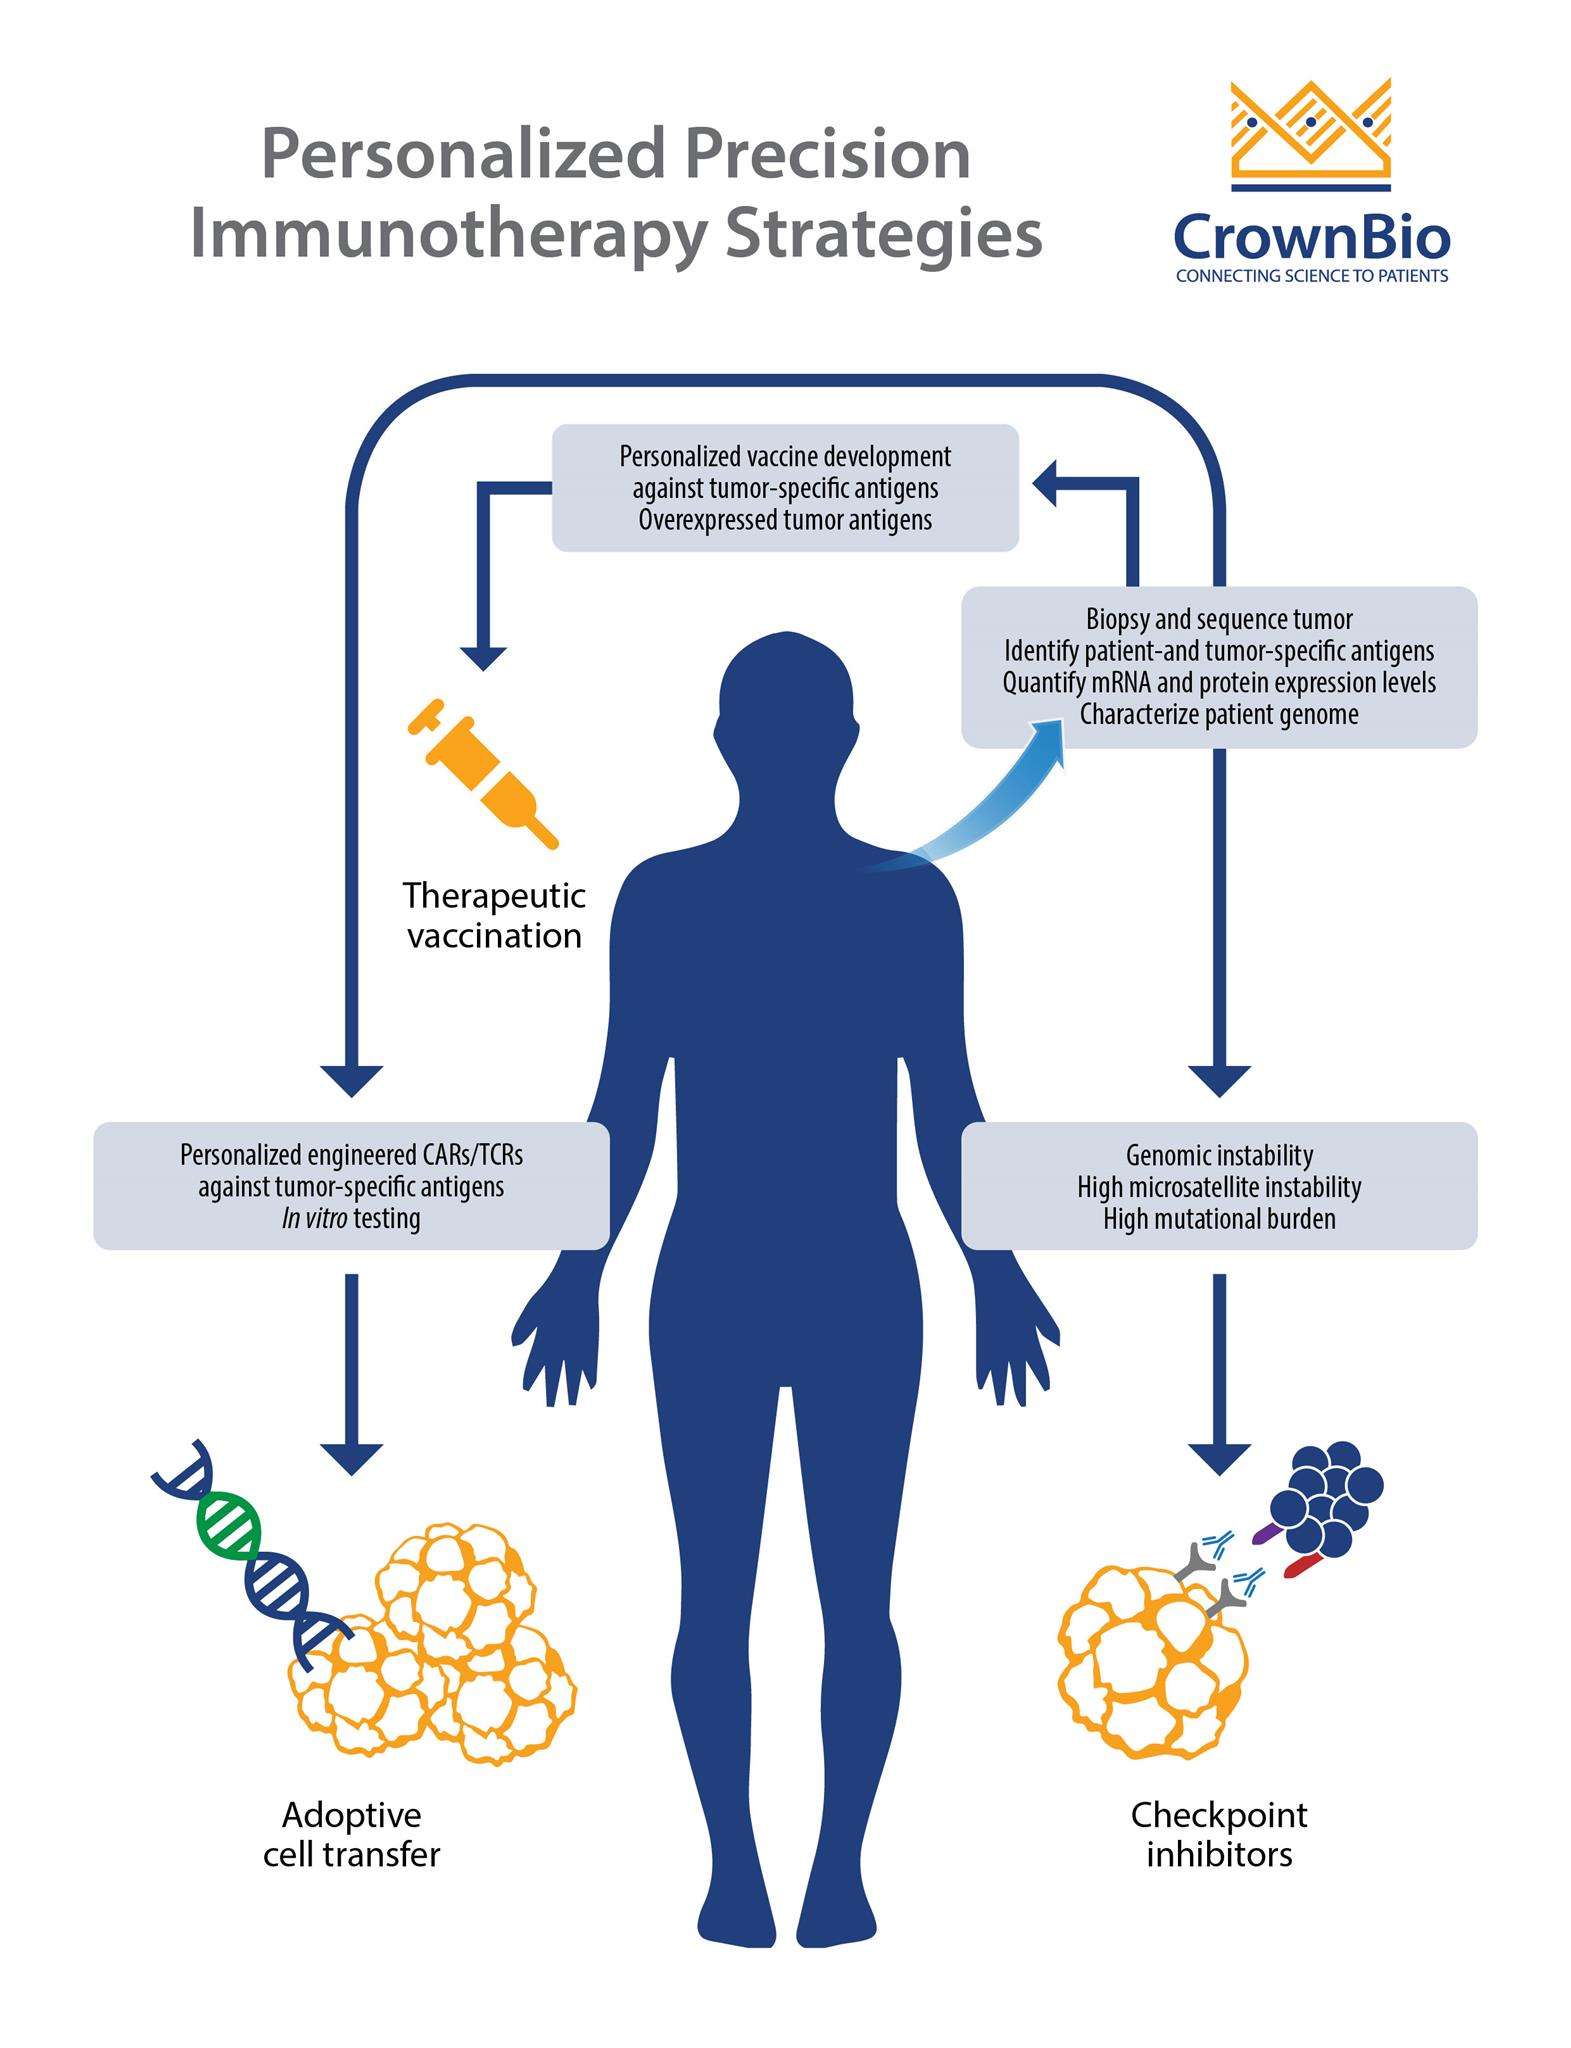 Personalized Cancer Immunotherapy